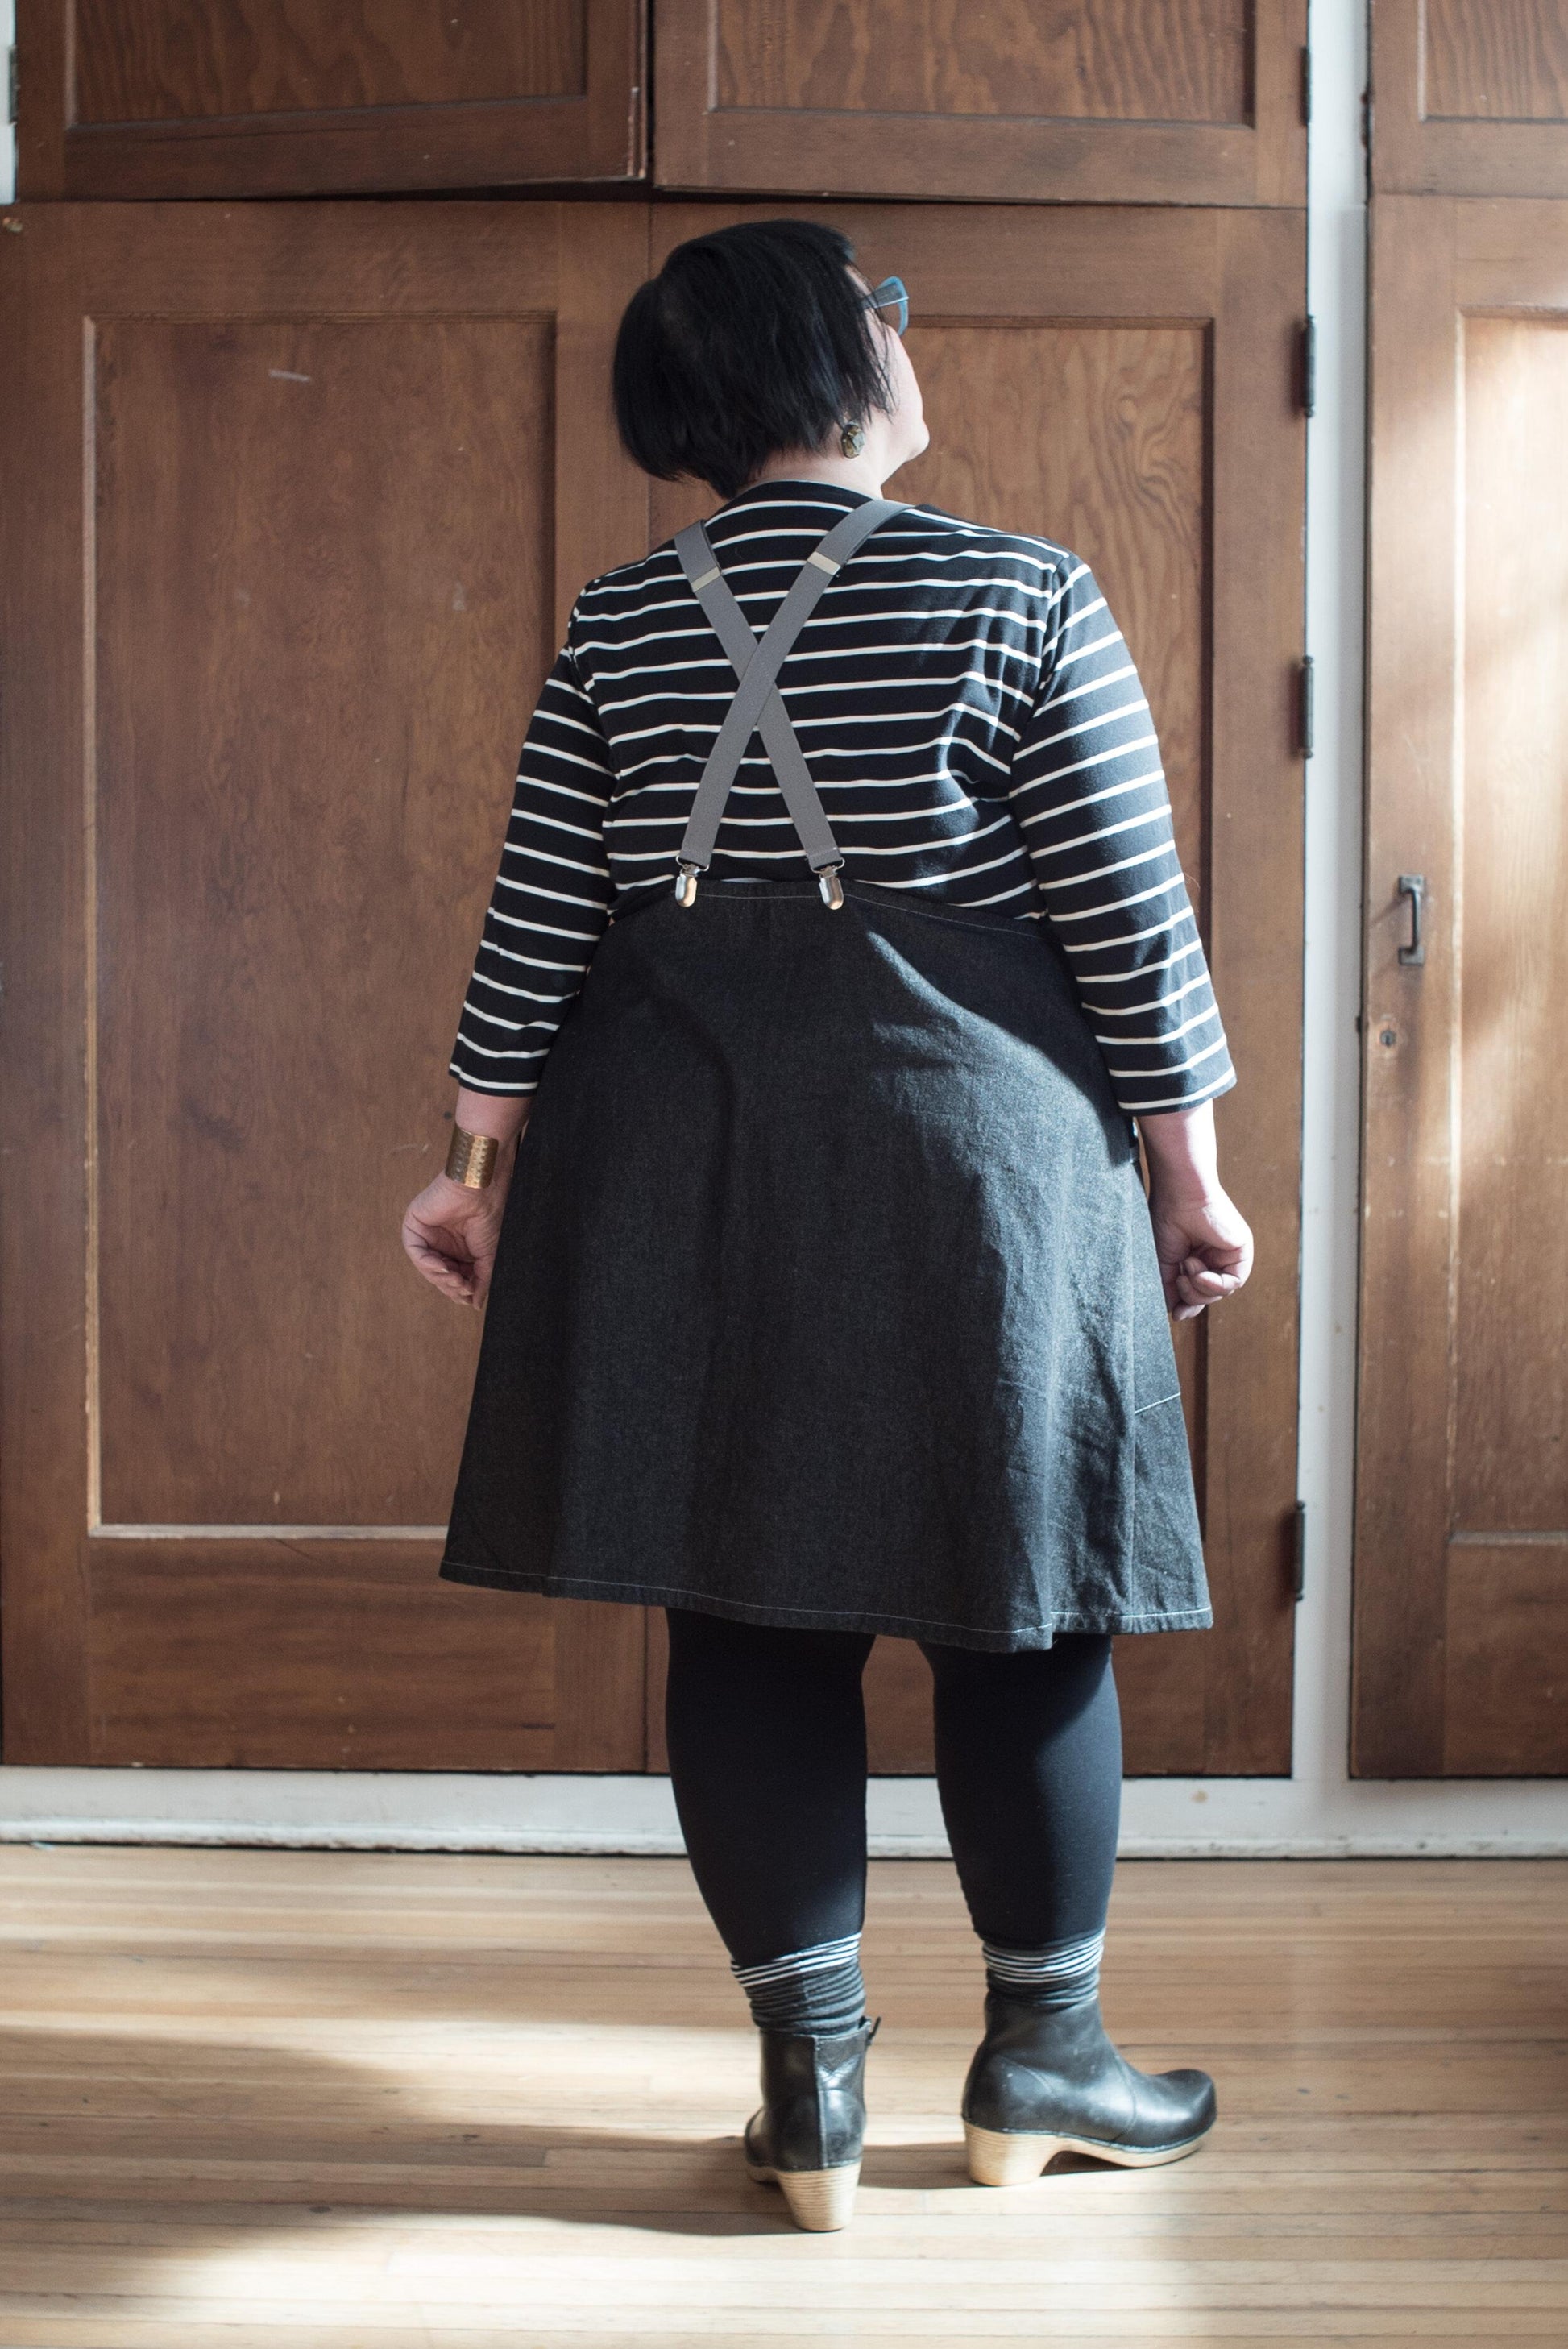 Back view of model wearing black denim suspender dress.100% cotton 8oz denim has a black wash and reads as very dark grey. The fabric is sturdy, hardworking yet lightweight. The pockets feature a contrasting self-trim. 